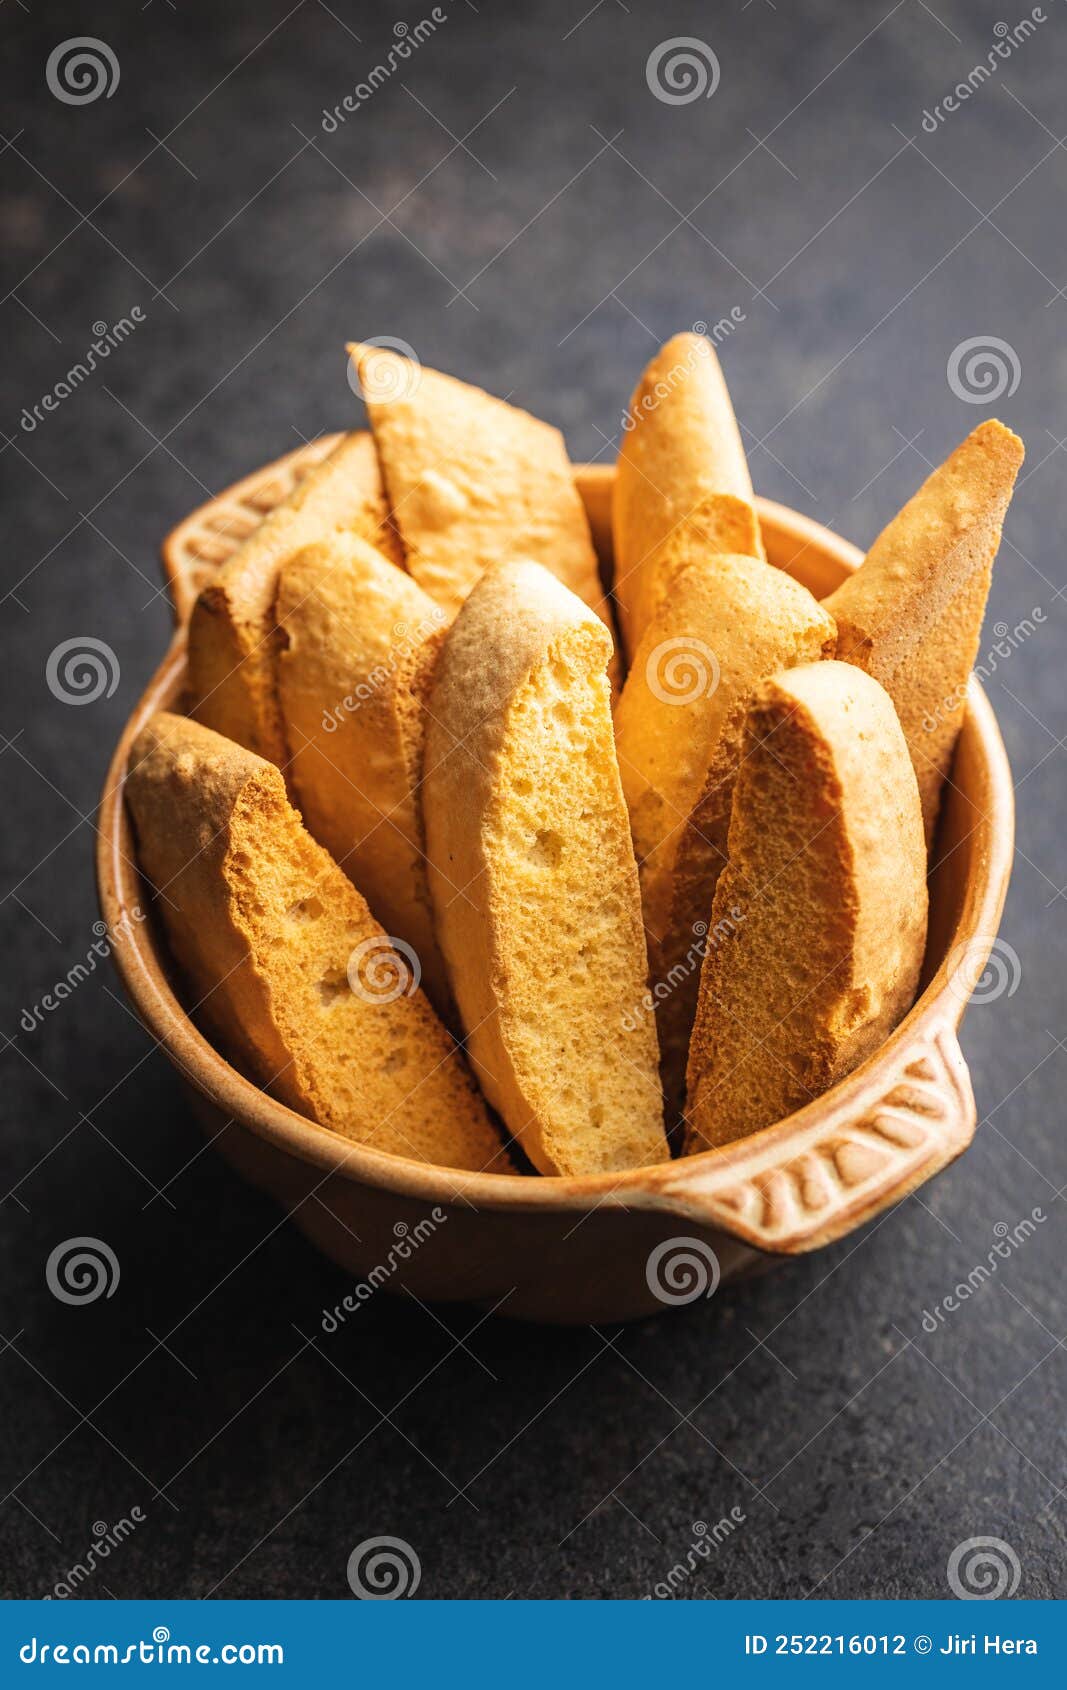 Sweet Anicini Cookies. Italian Biscotti with Anise Flavor in Bowl on ...